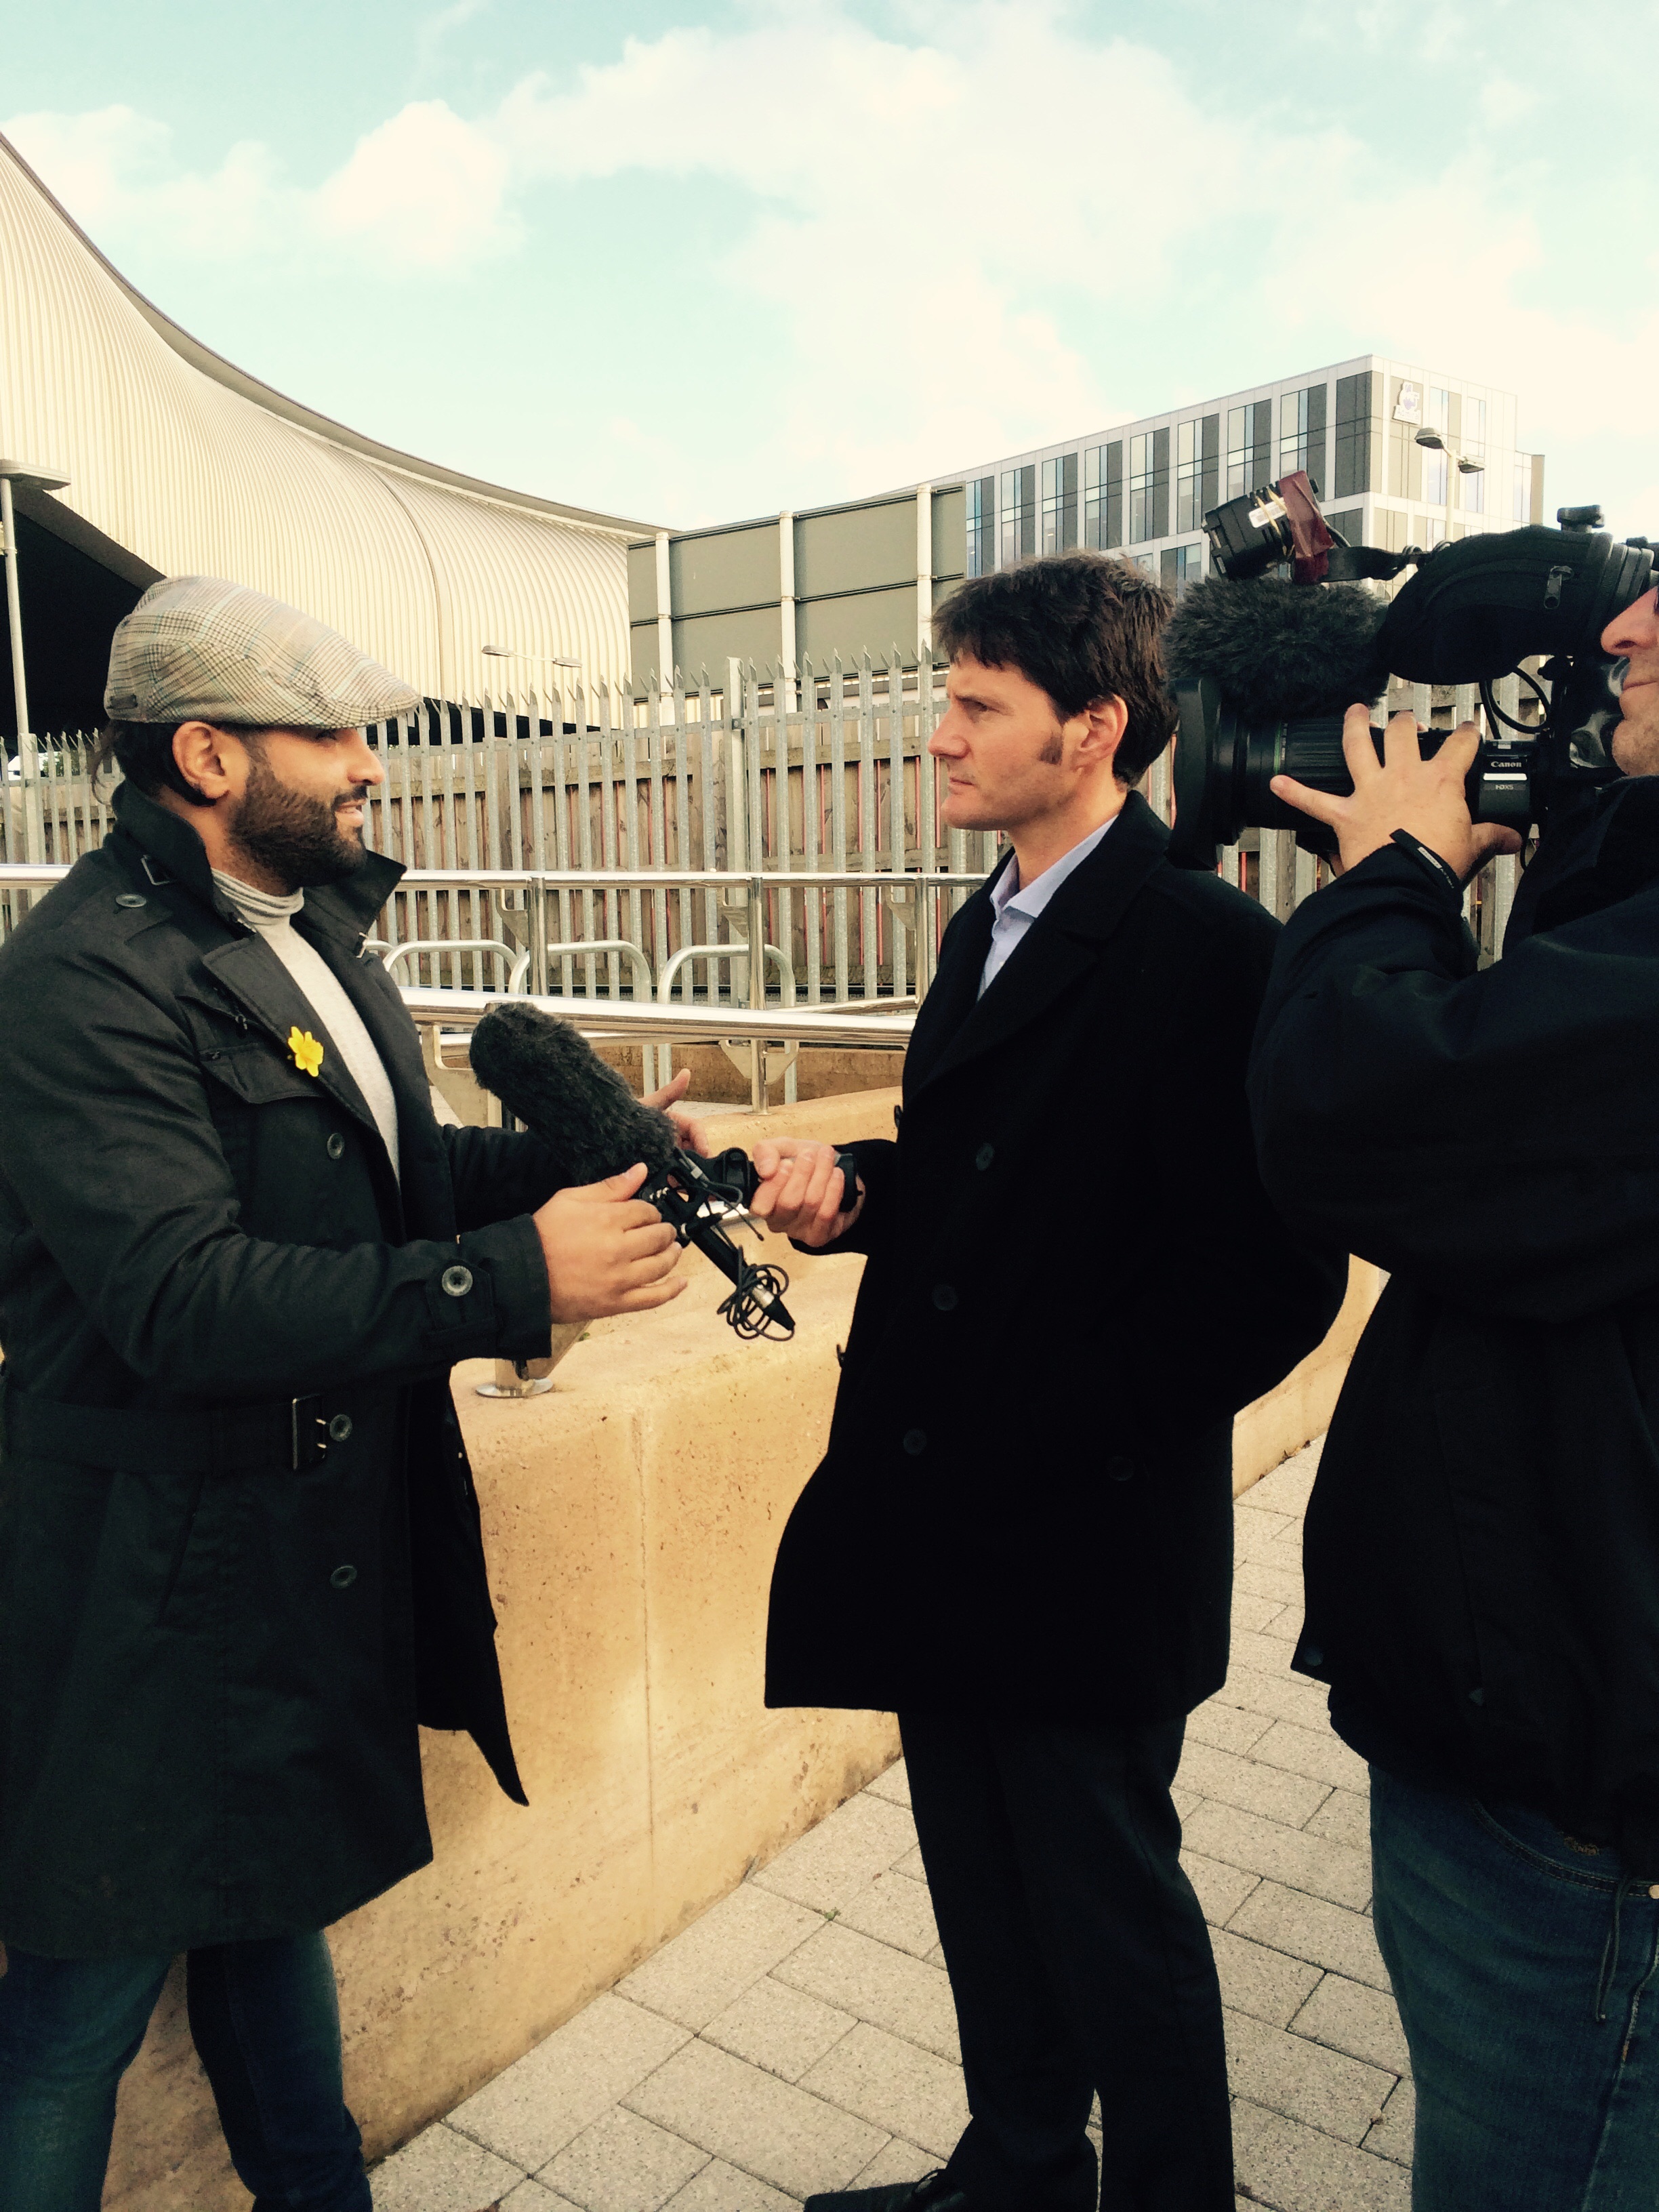 Interview with BBC Wales News about National theatre Wales street theatre play 